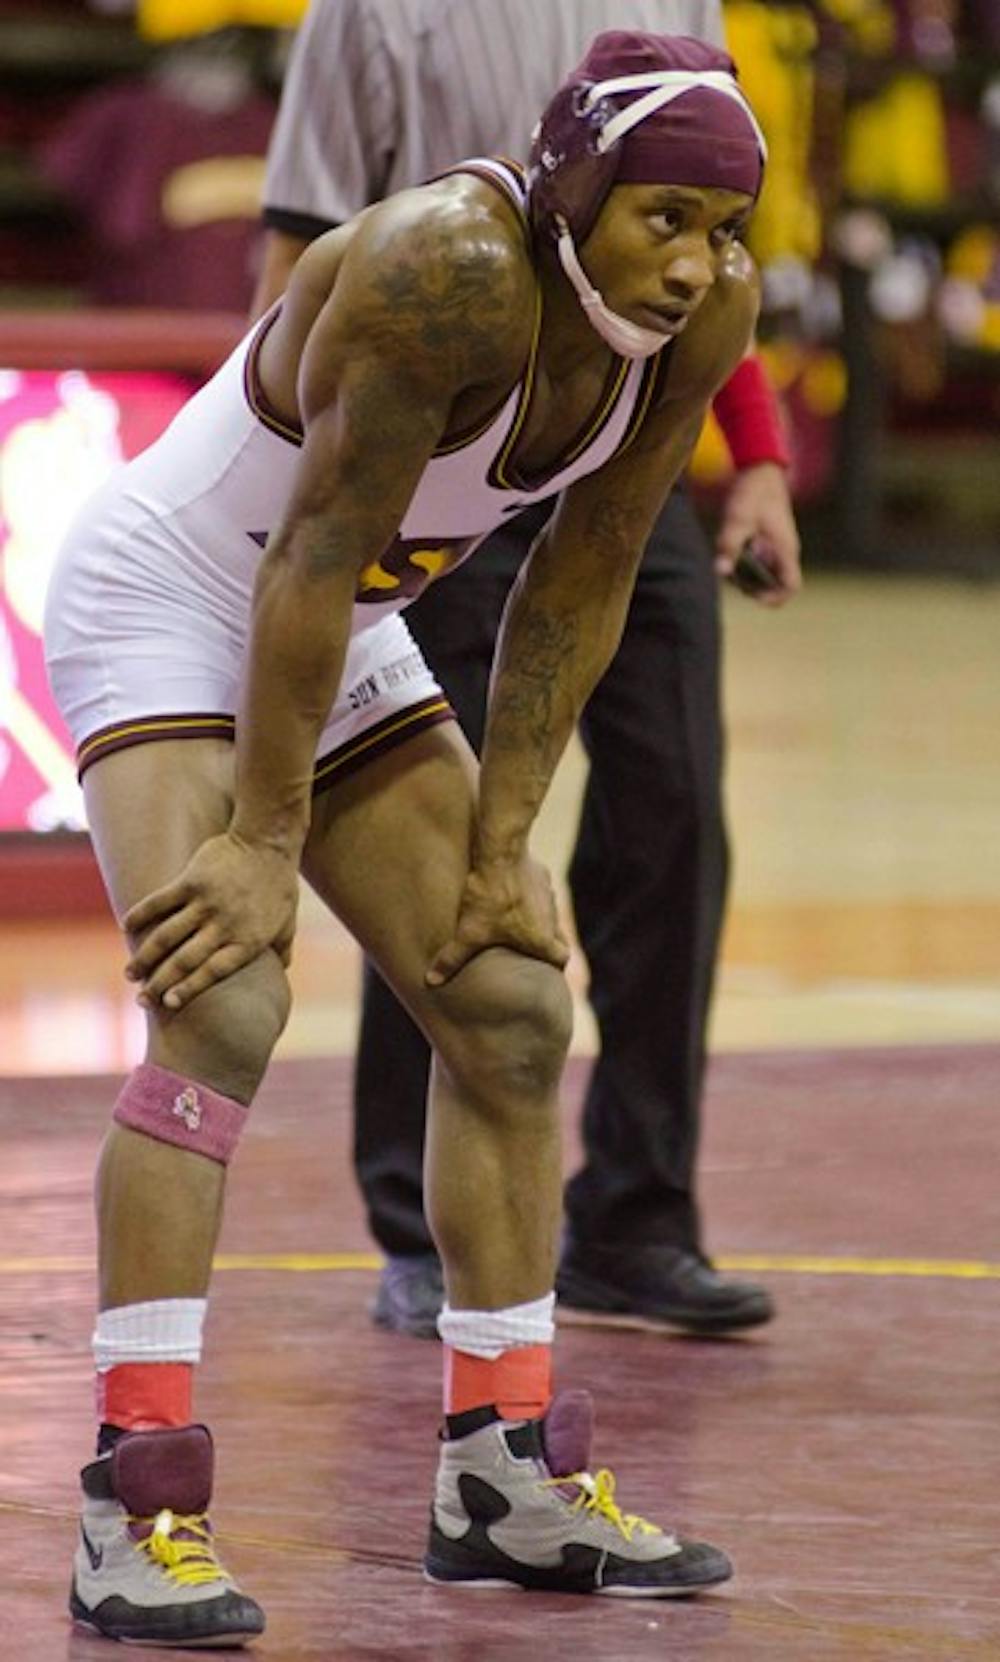 Ultimate Fighter: ASU senior and NCAA National Champion Bubba Jenkins stands on the mat after a victory over Cal State Fullerton on Nov. 27. Jenkins plans to coach at ASU after graduating, and then pursuing a career in MMA. (Photo by Aaron Lavinsky)